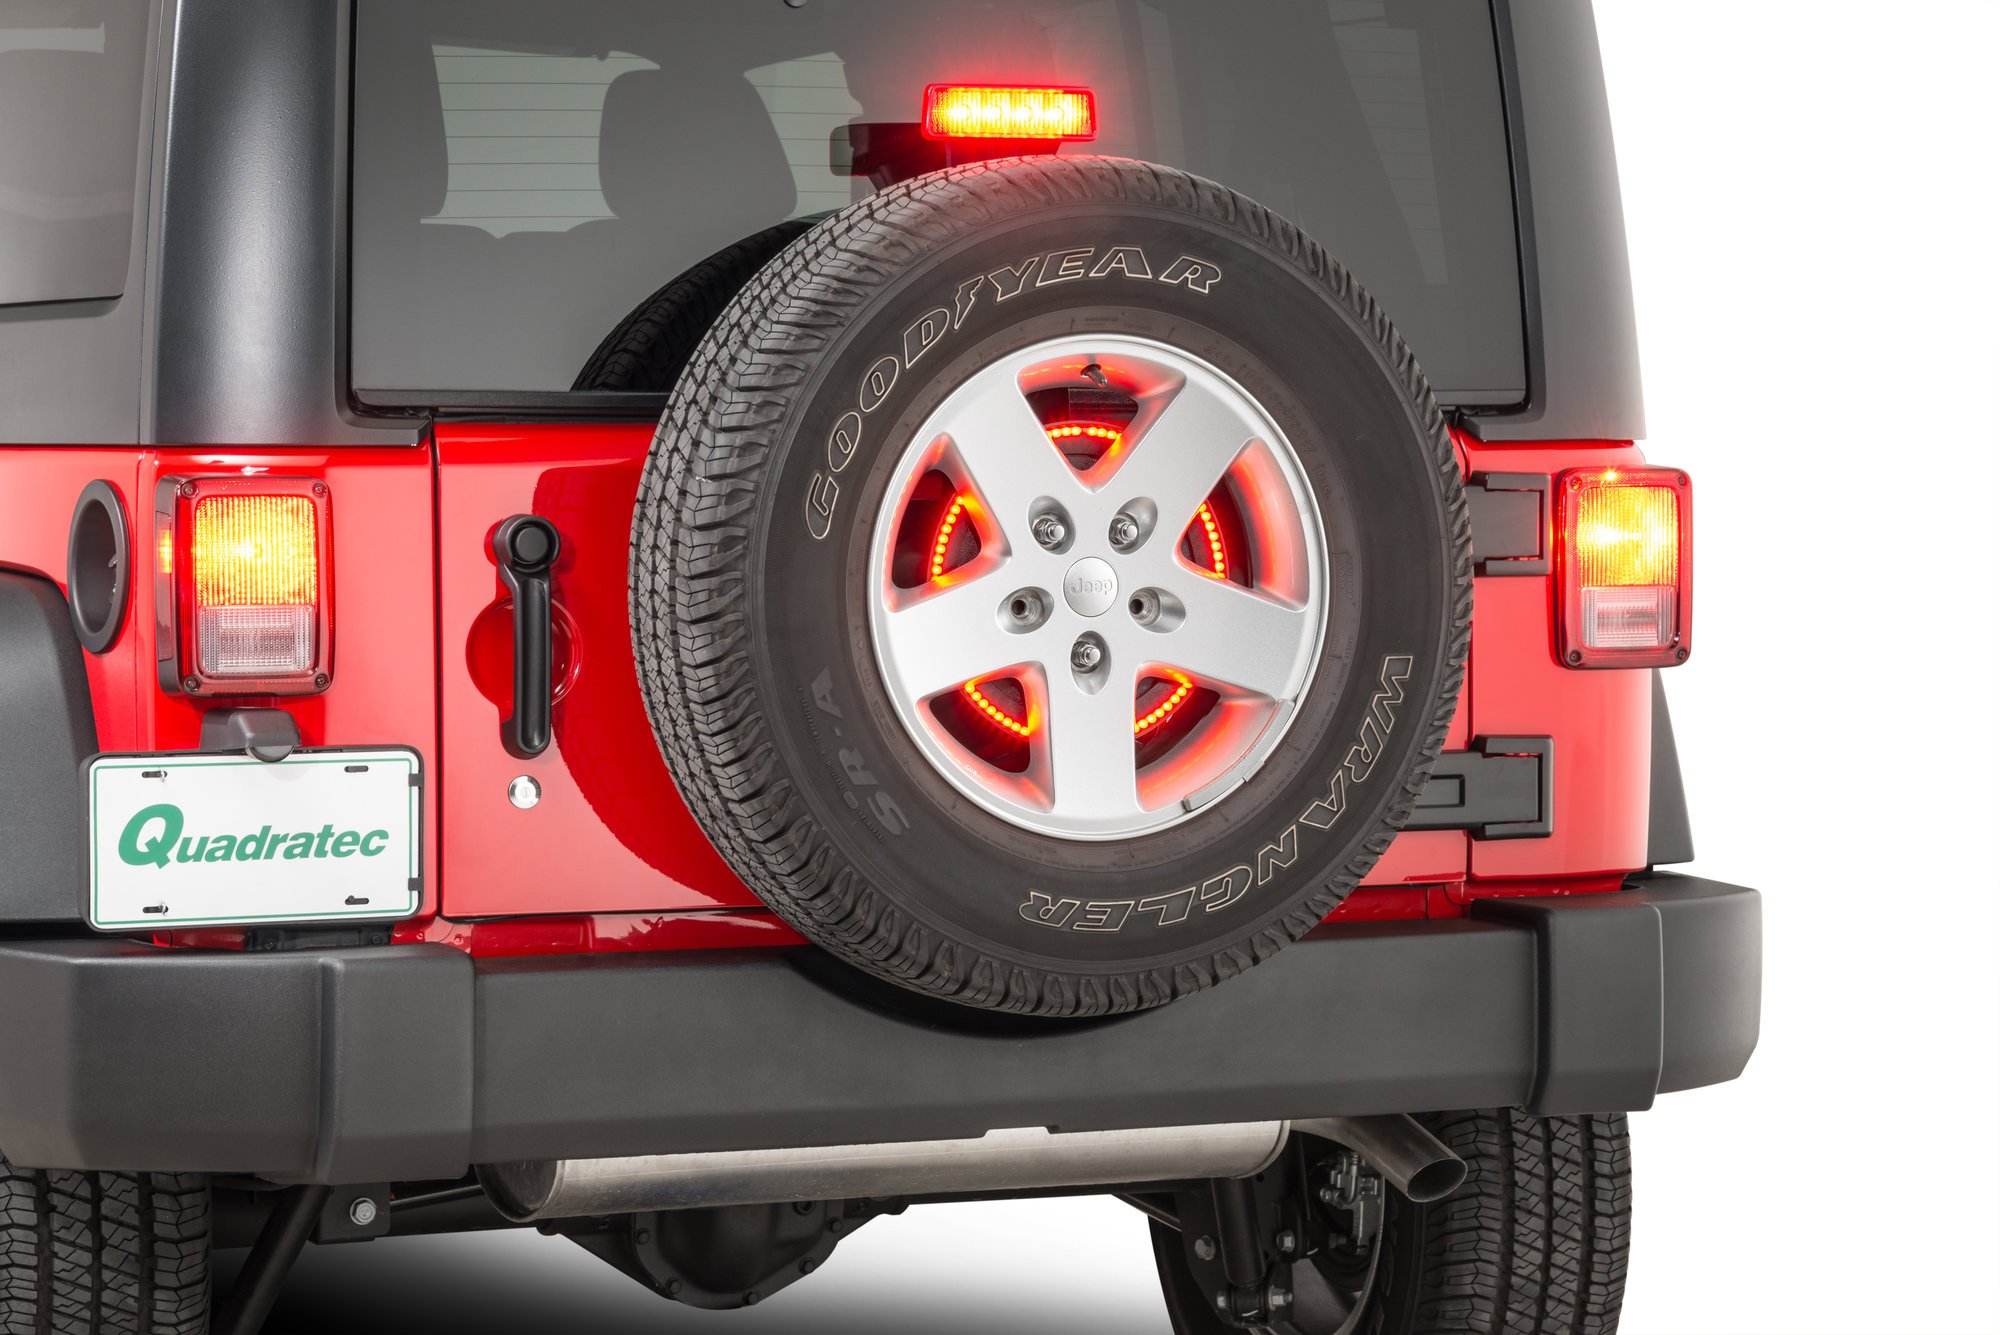 LED Ring Compatible with Jeep Wrangler JK YJ TJ & JL Accessories Smoked Lens RGB 7 Color 120 Modes 5 x 4.5/5/5.5 Lug Pattern Waterproof Spare Tire 3rd Third Brake light for Jeep Wrangler 